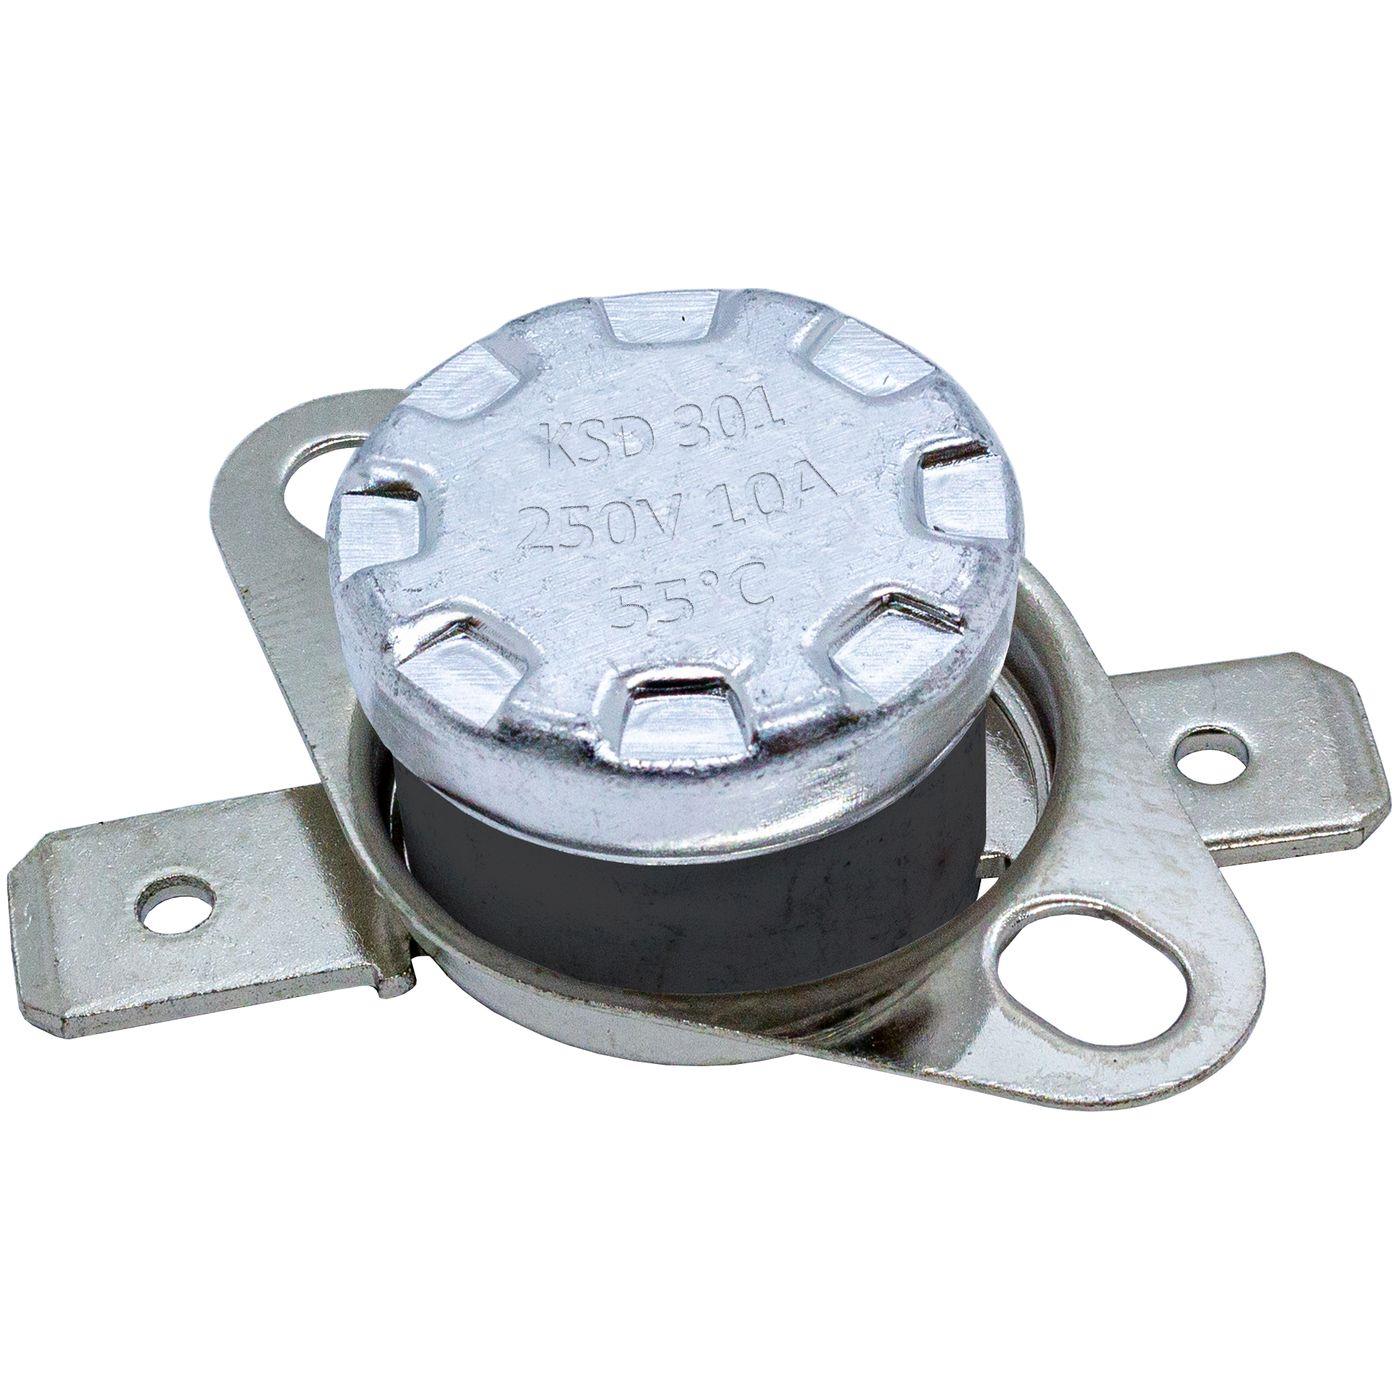 Thermal switch 55°C NO contact 250V 10A Temperature switch thermostat KSD301 Bimetal Thermal protection